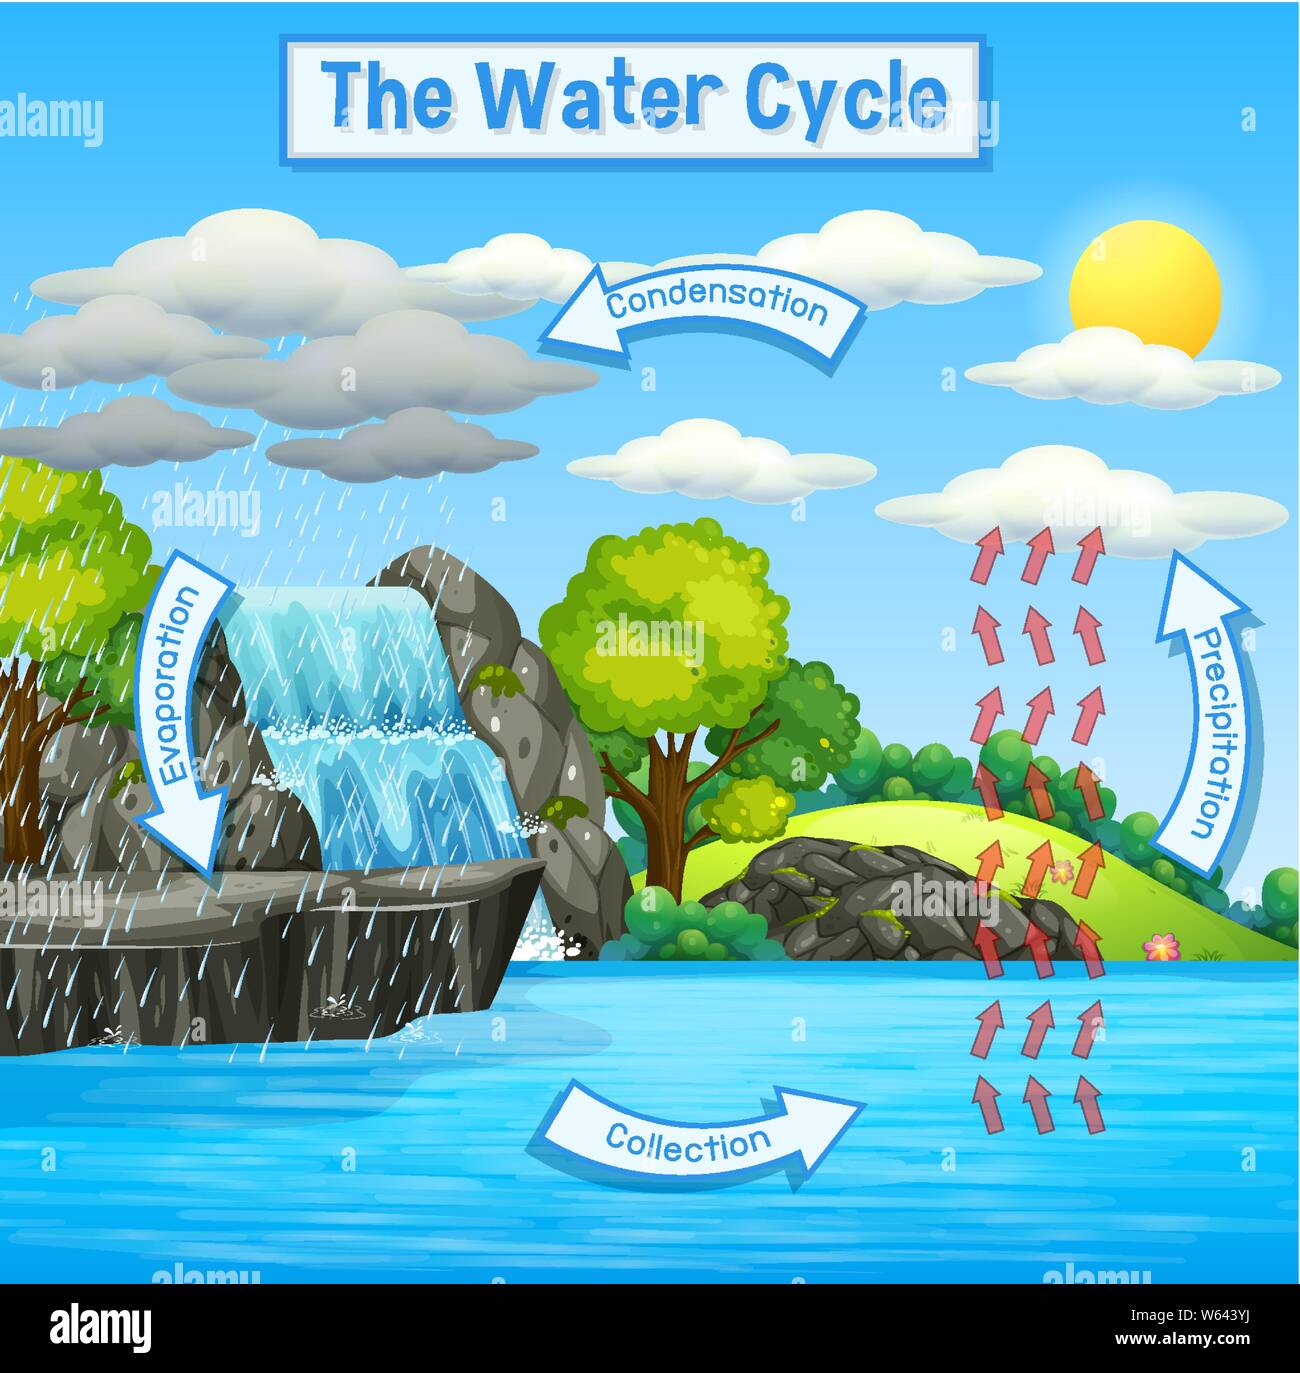 Water Cycle Diagram Labeling. Diagram | Quizlet-cacanhphuclong.com.vn